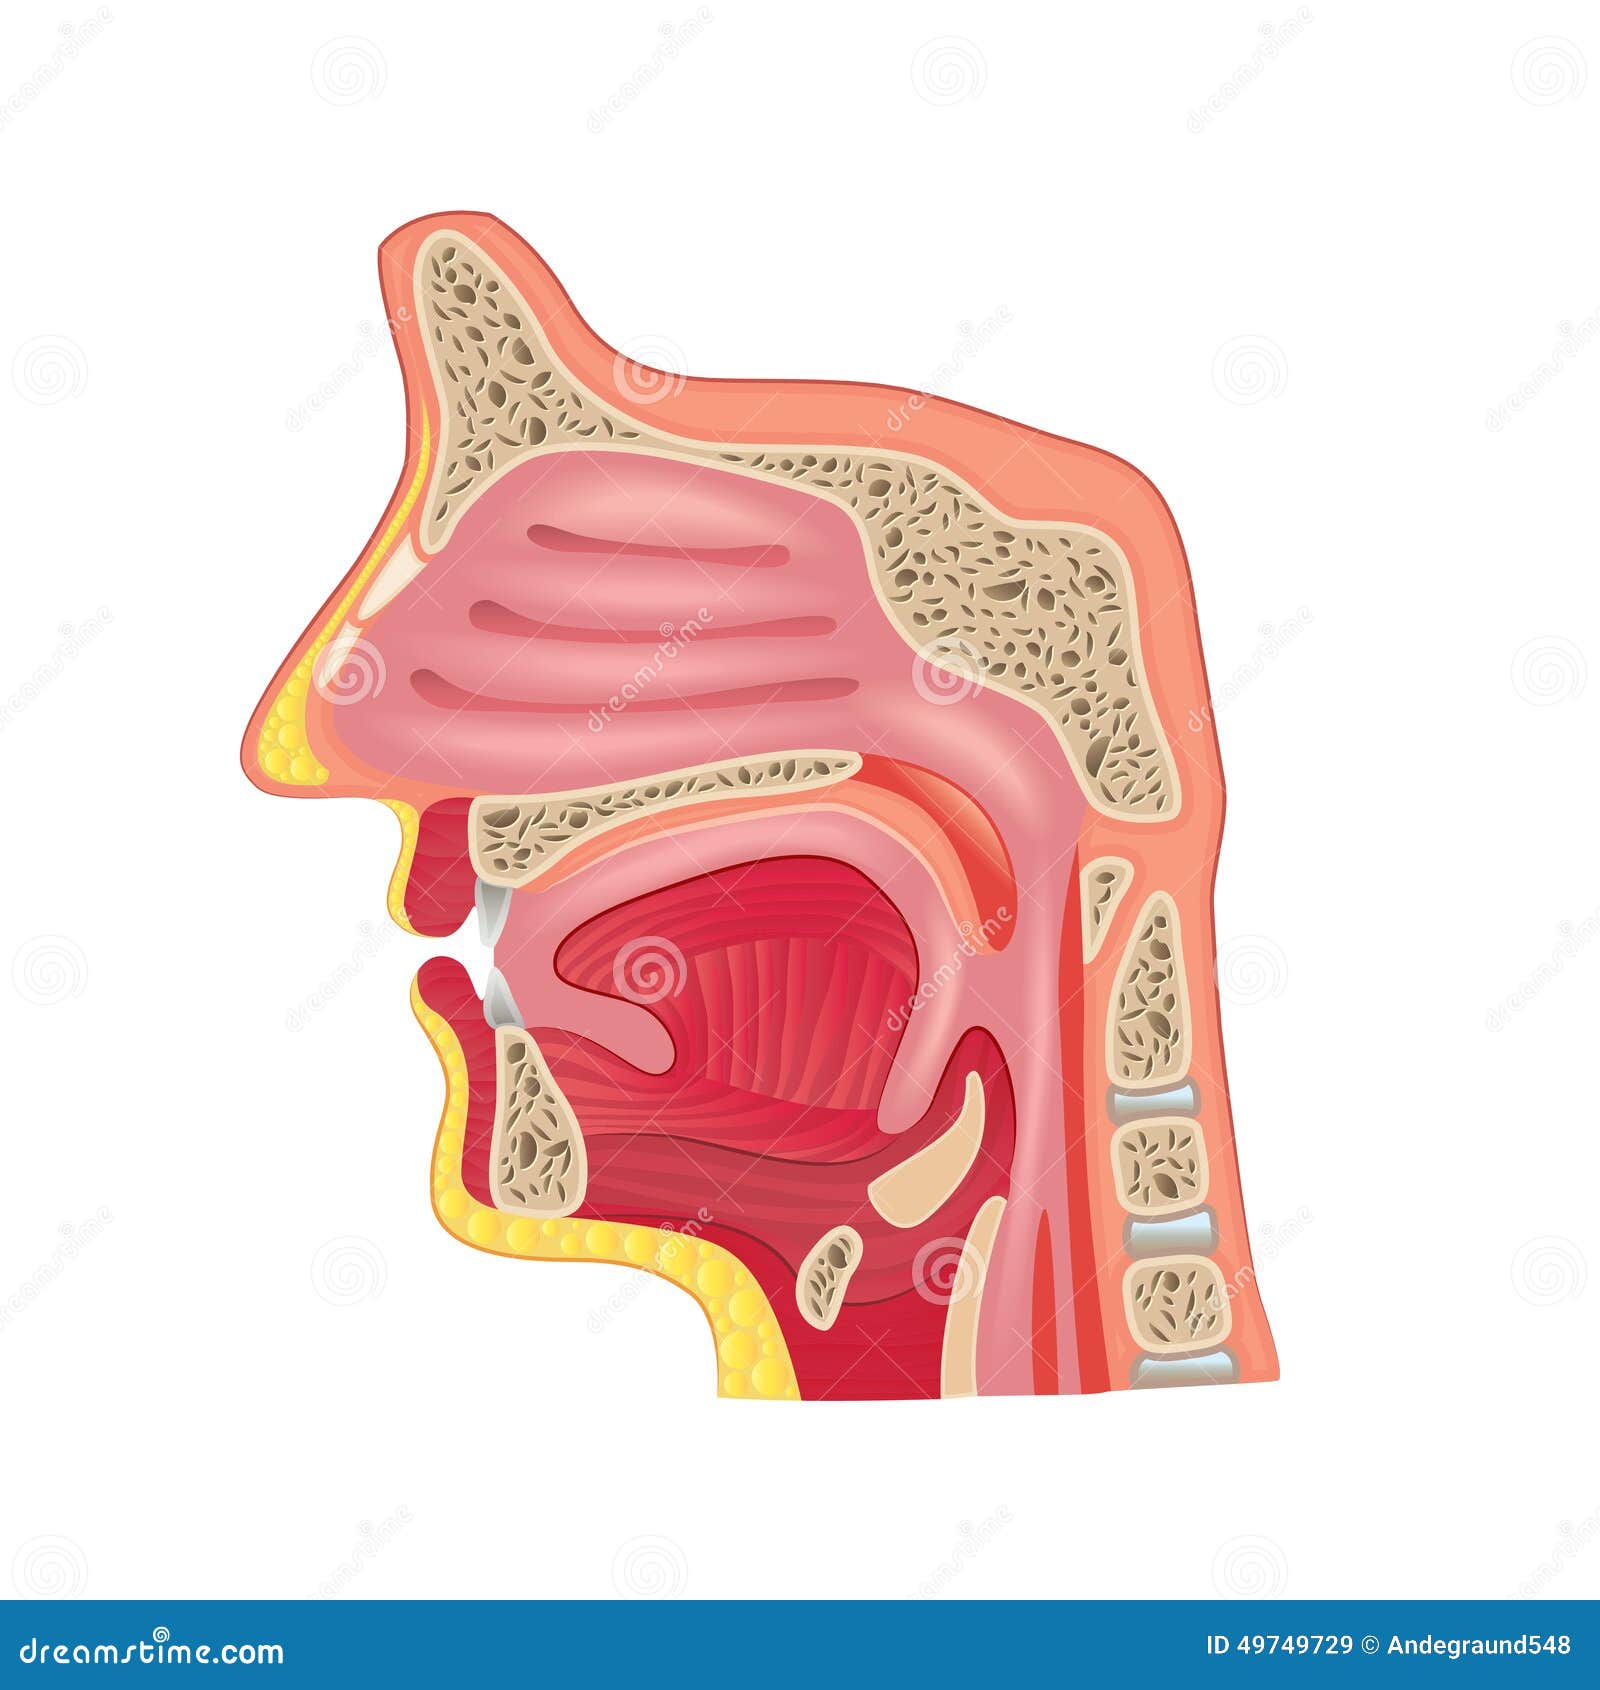 Nose Anatomy Isolated On White Vector Stock Vector ... blank face diagram 